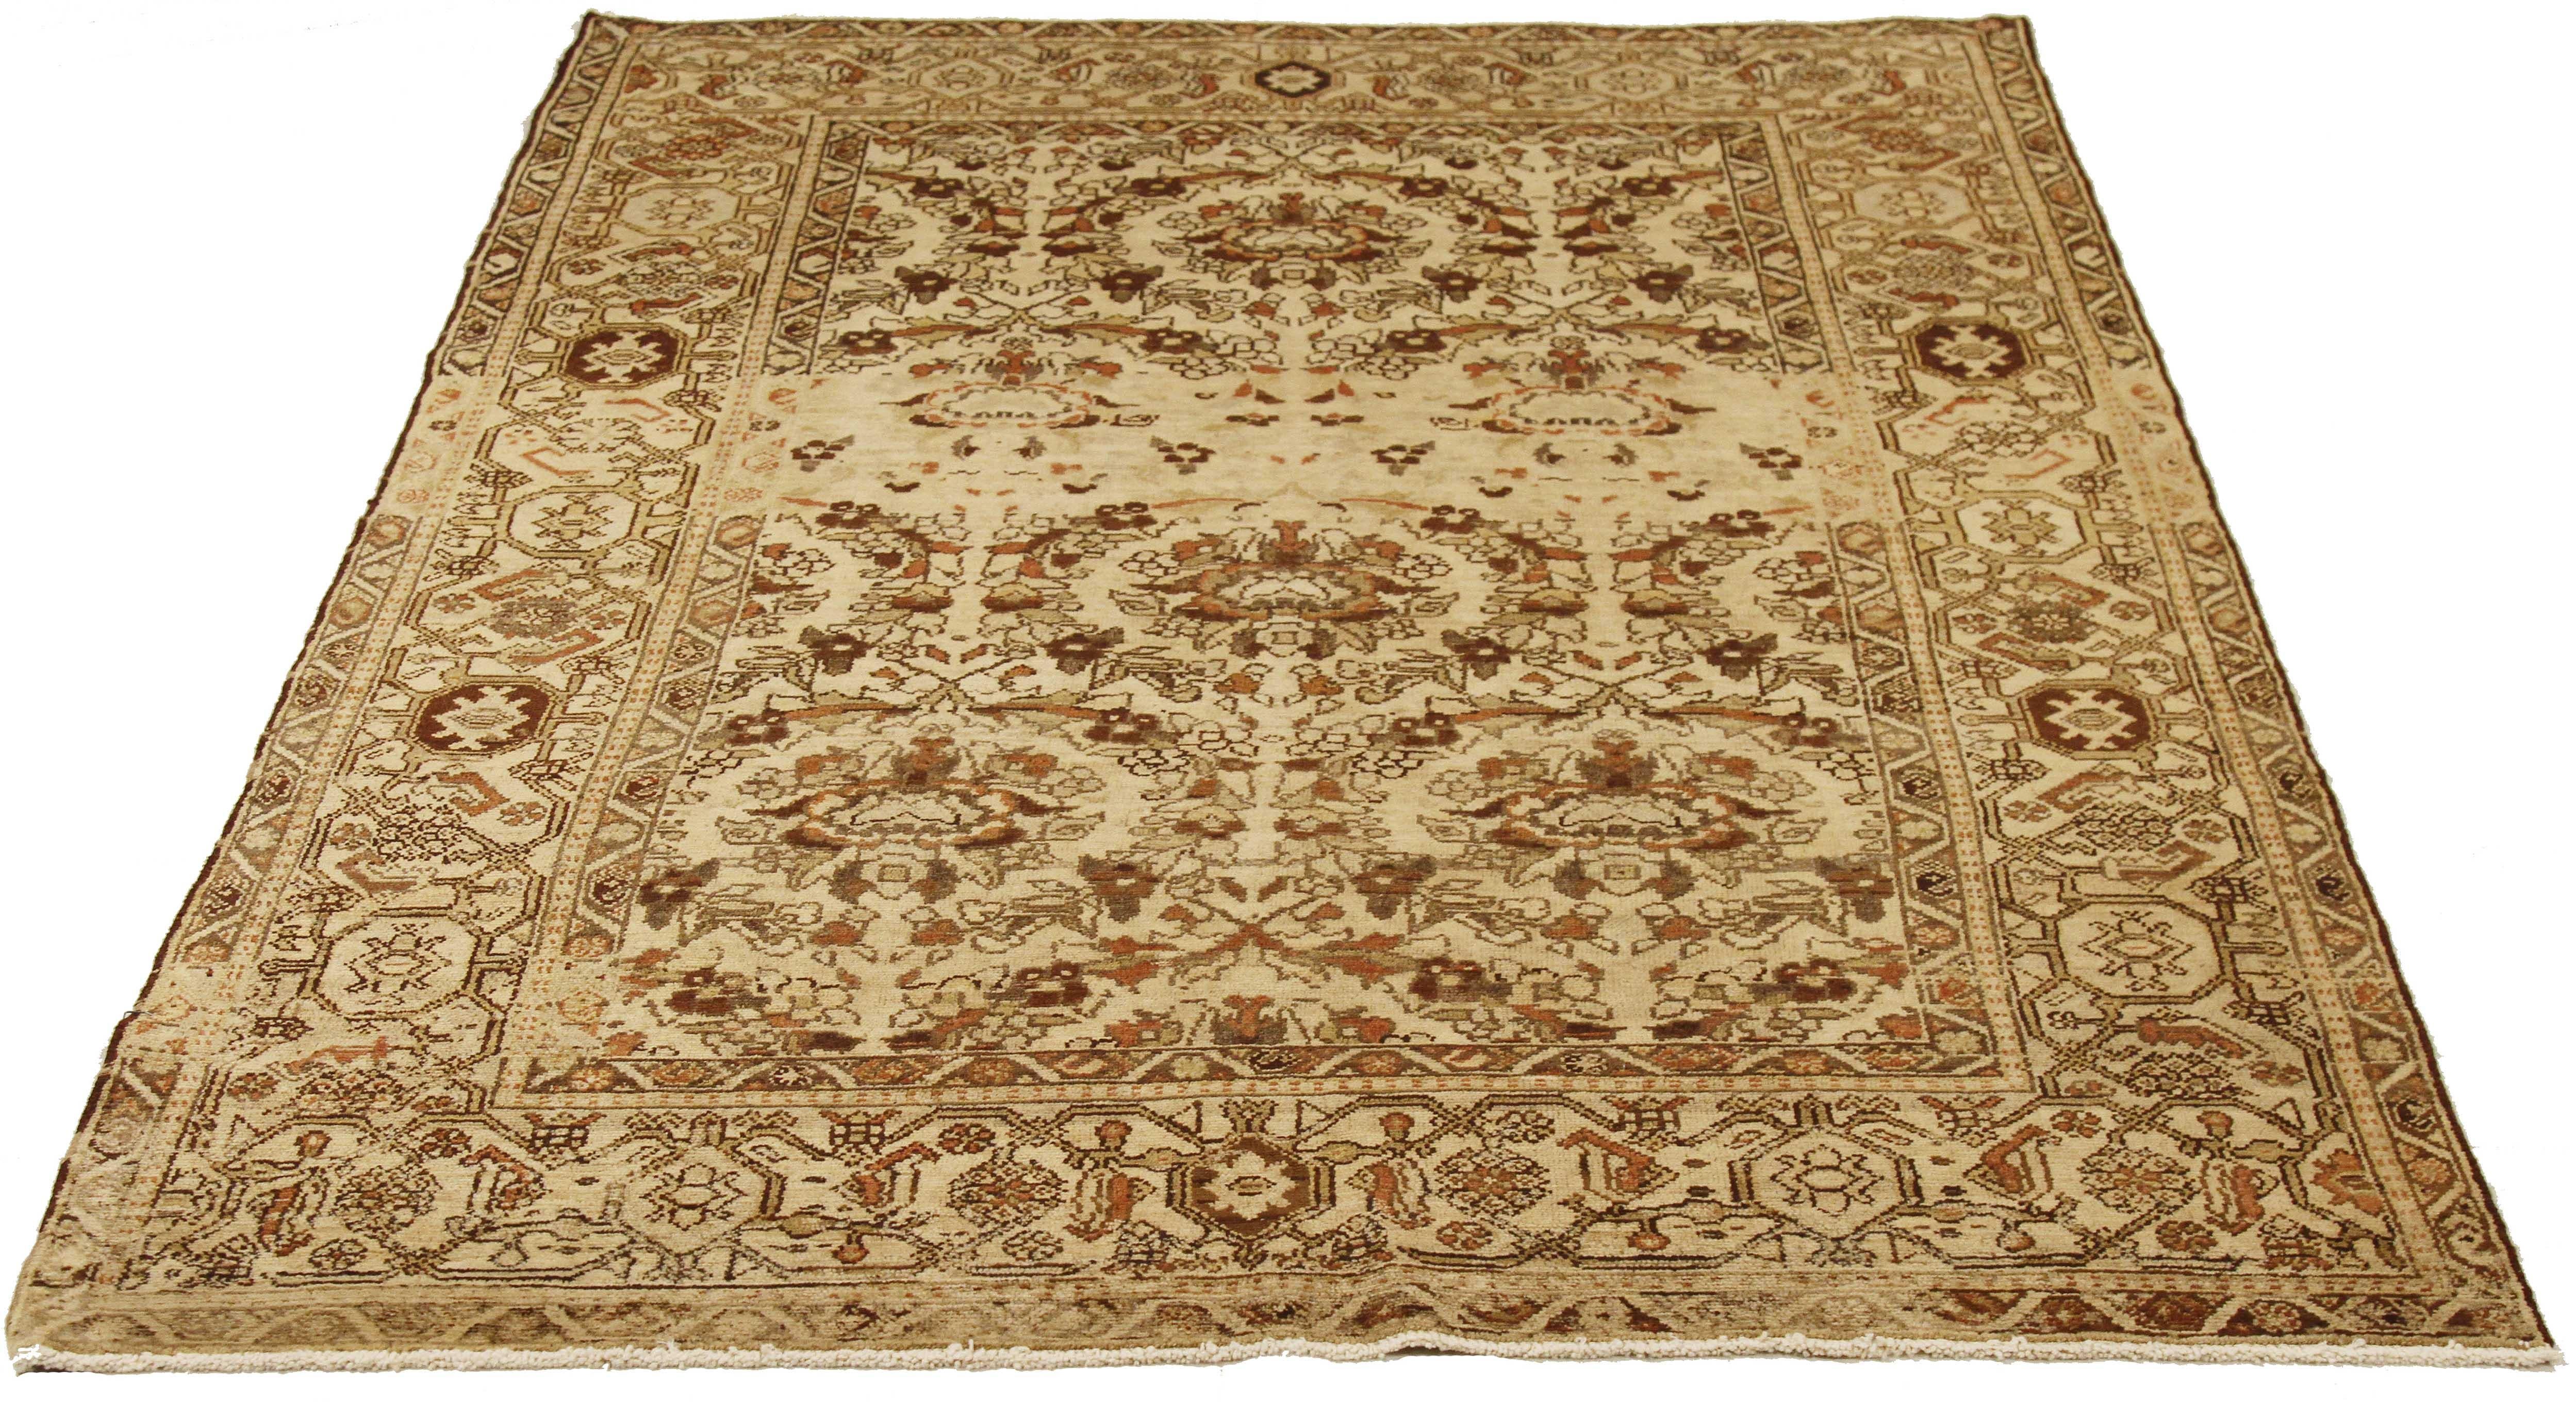 Antique Persian runner rug handwoven from the finest sheep’s wool and colored with all-natural vegetable dyes that are safe for humans and pets. It’s a traditional Malayer design featuring brown and black floral details over an ivory field. It’s a